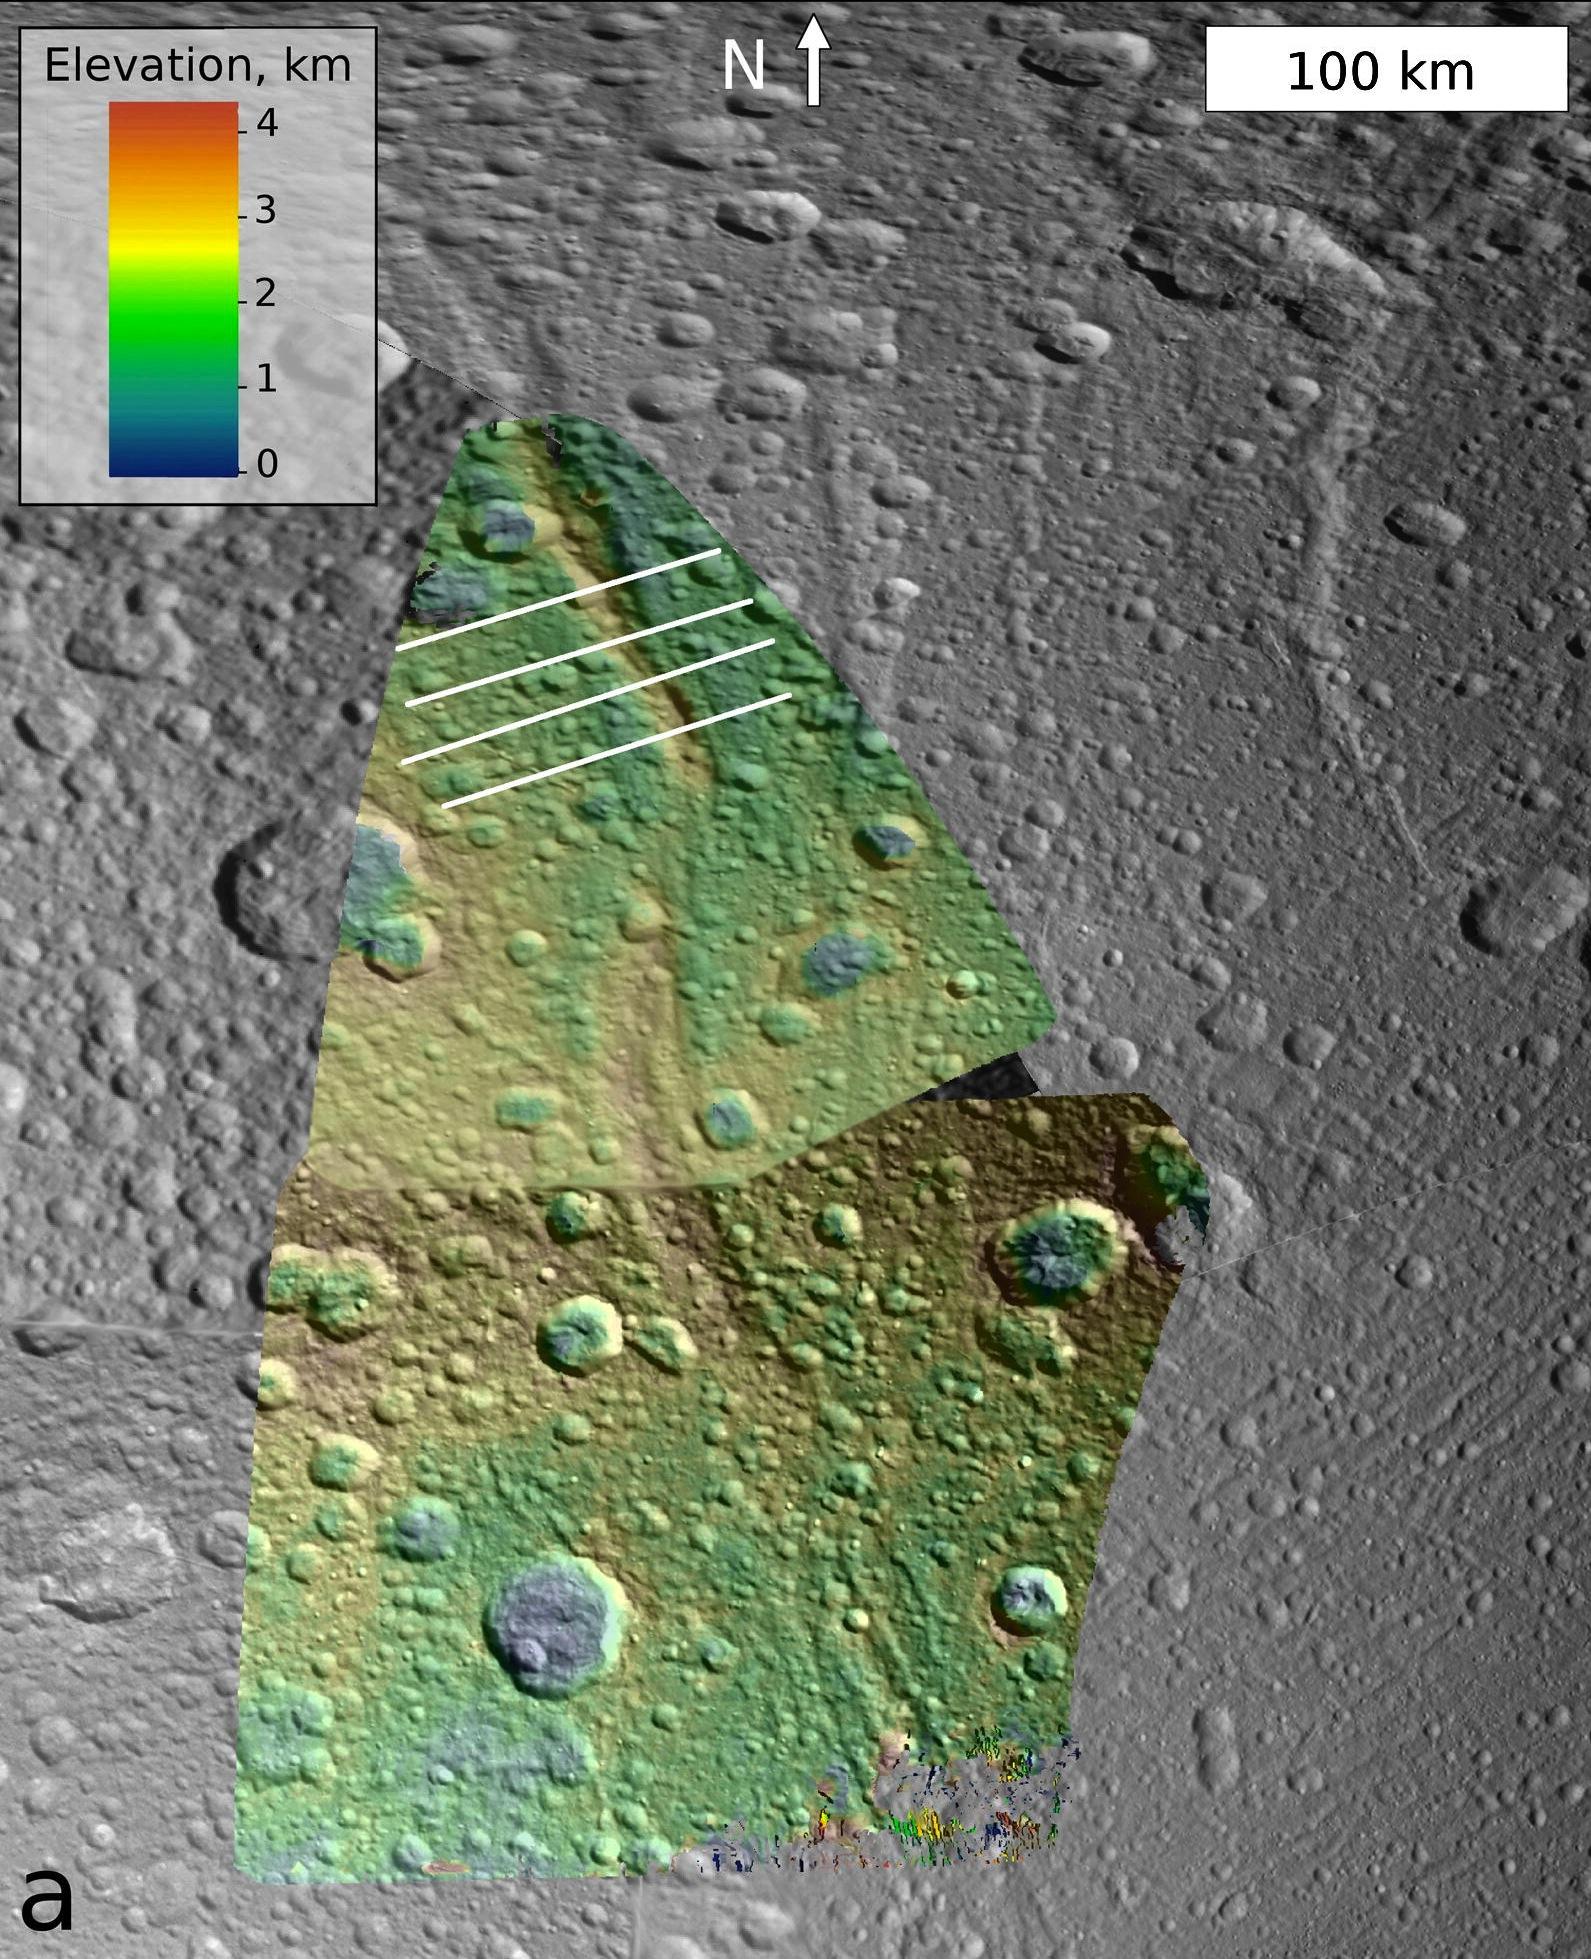 Topography of a mountain known as Janiculum Dorsa on the Saturnian moon Dione